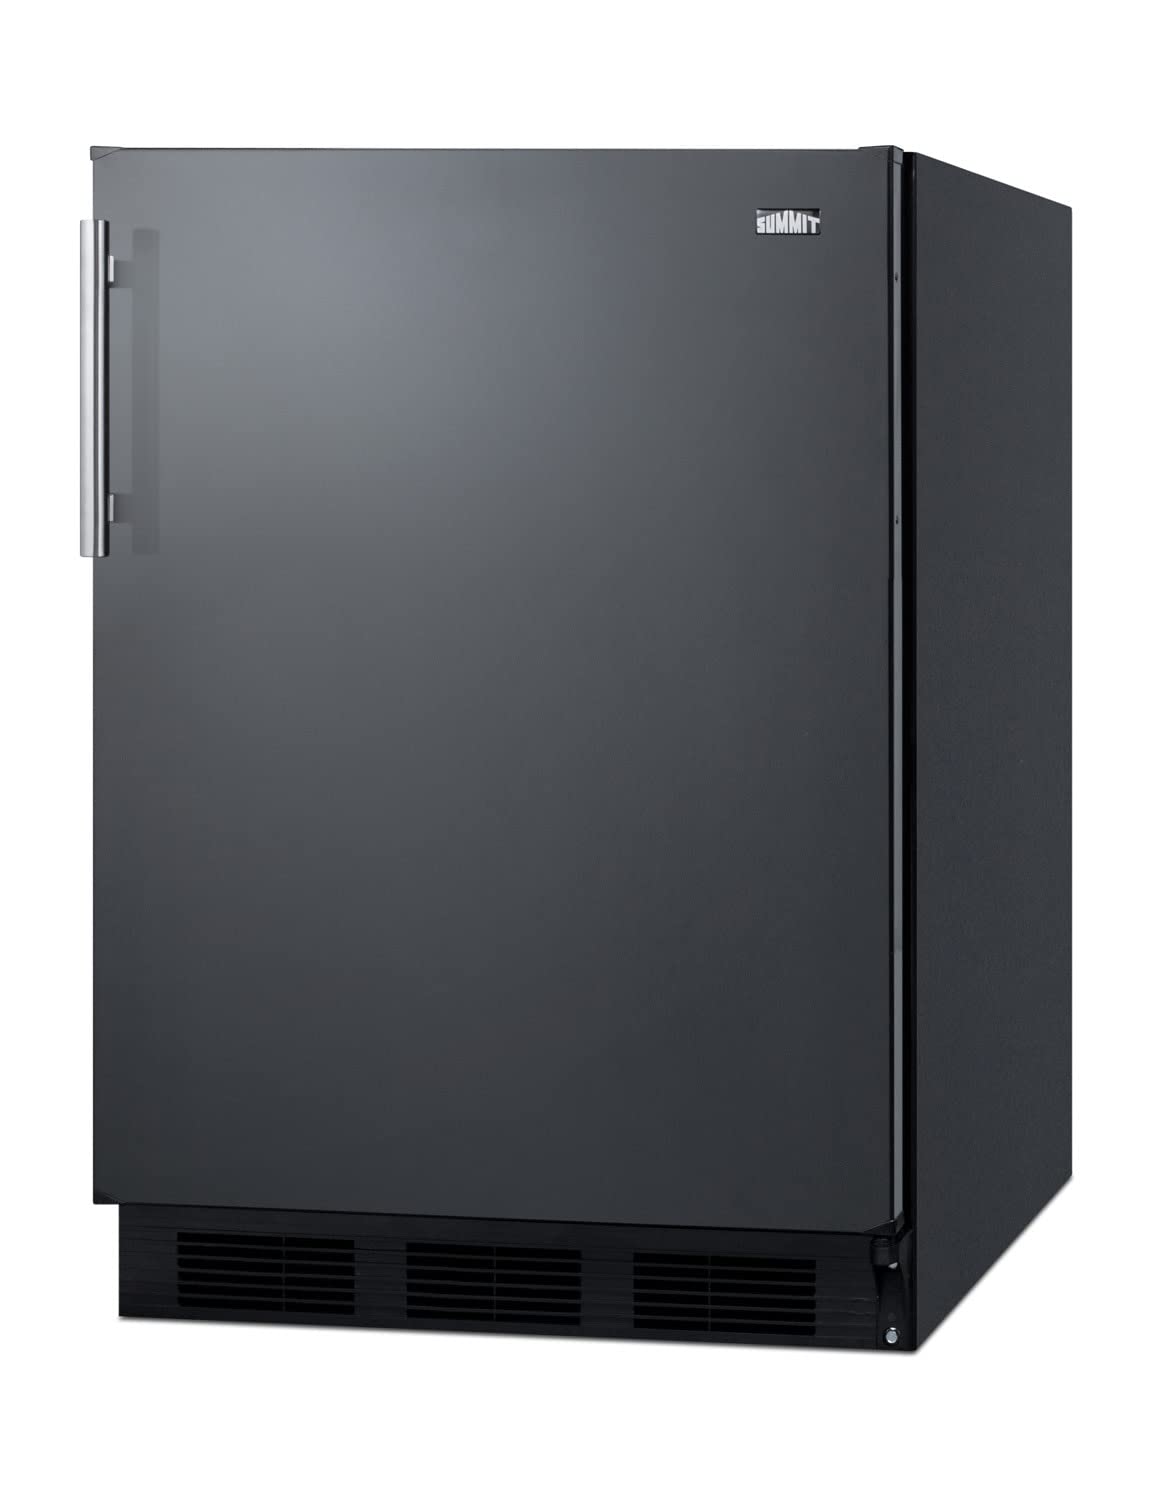 Summit Appliance FF63BK Freestanding Residential Counter Height 24" Wide All-refrigerator in Black Exterior with Auto Defrost, Deluxe Interior, Pro Style Handle and Adjustable Thermostat